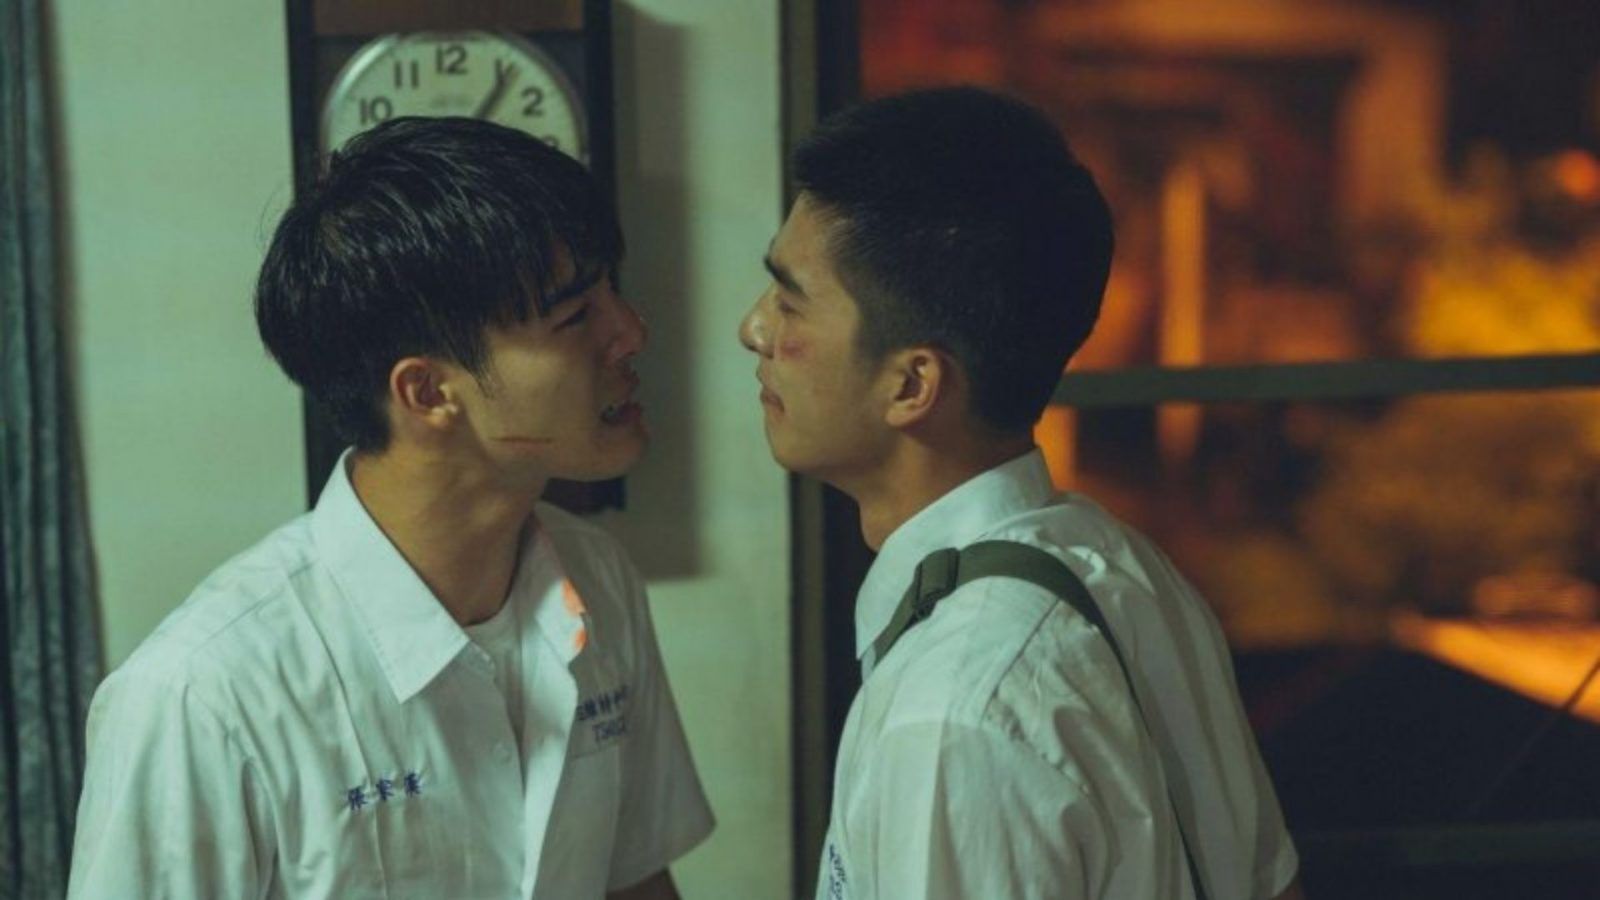 Www Chineshe Schel Sex - 11 Asian LGBTQ+ movies to watch this Pride Month